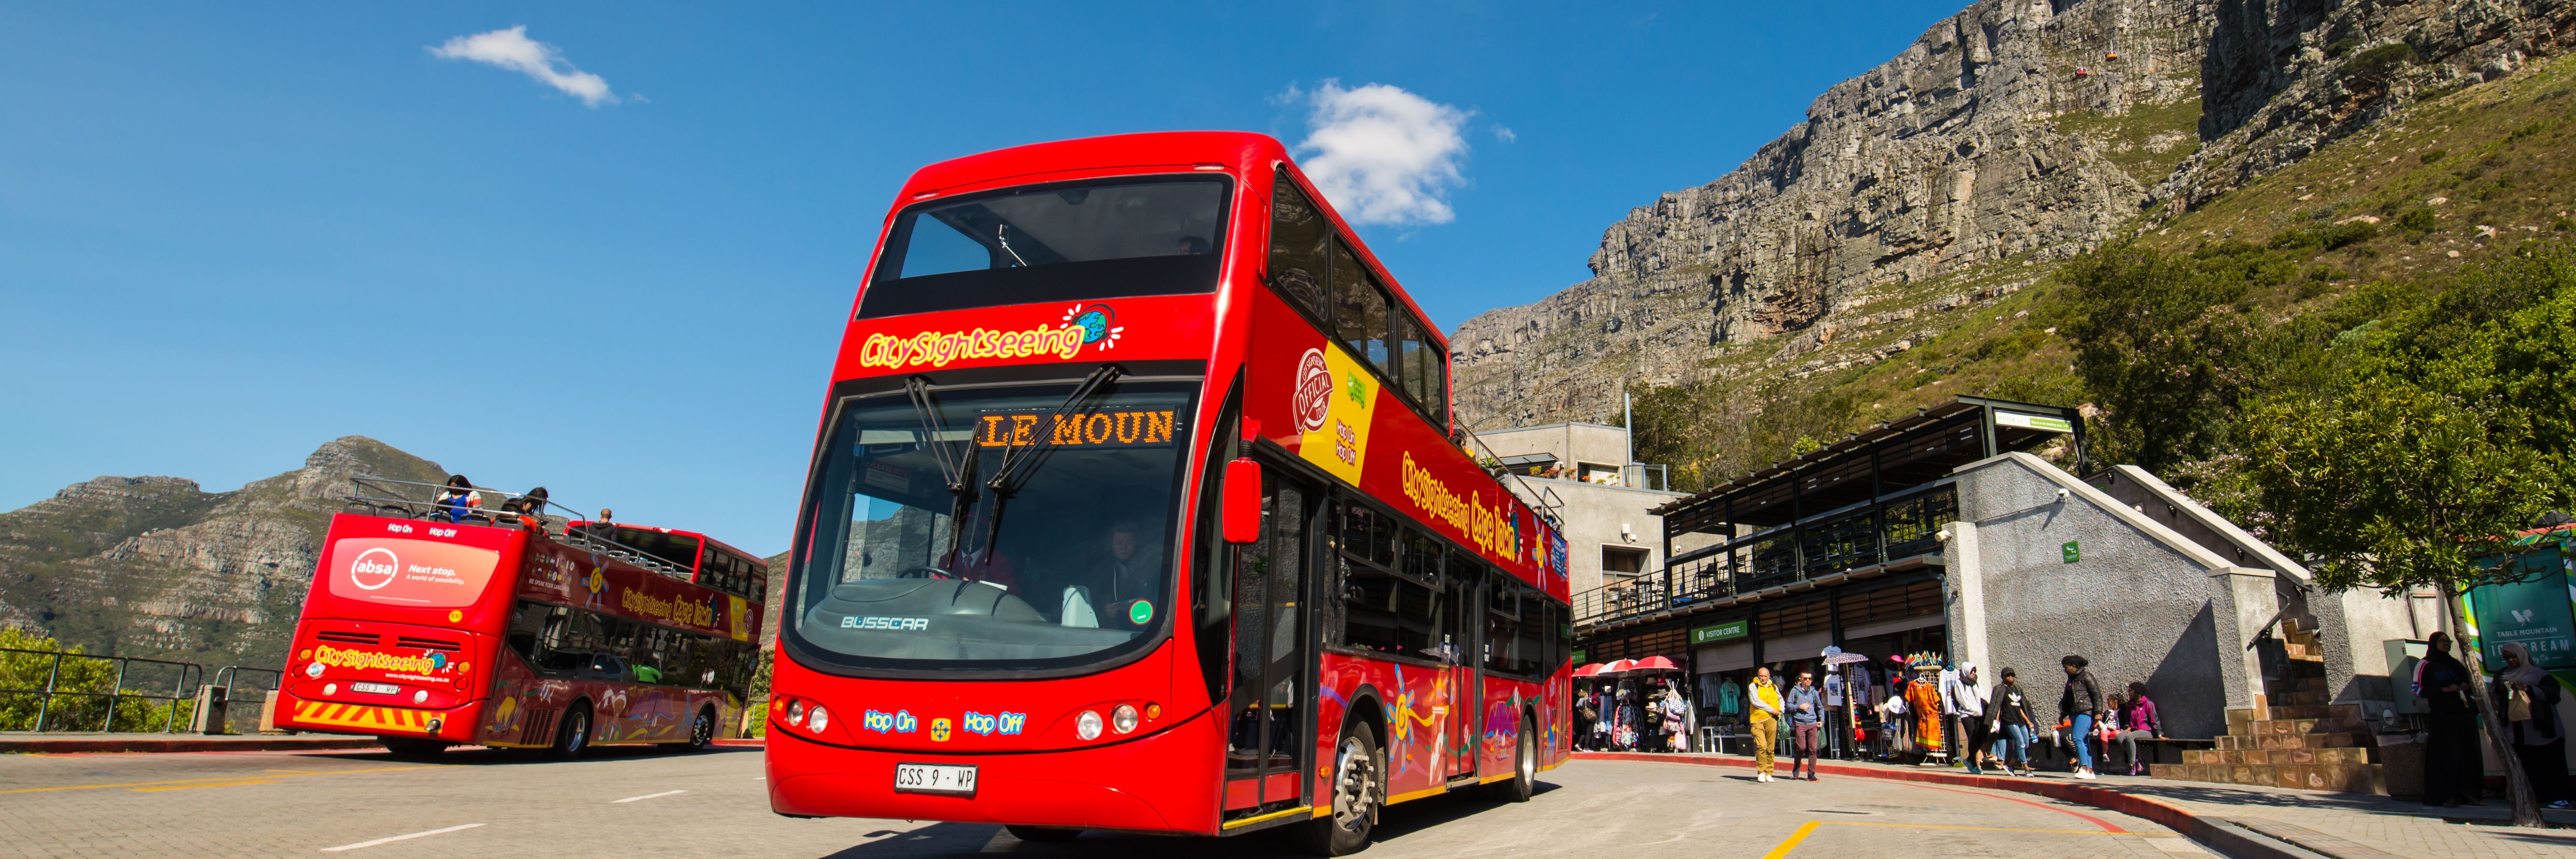 cape town tours red bus